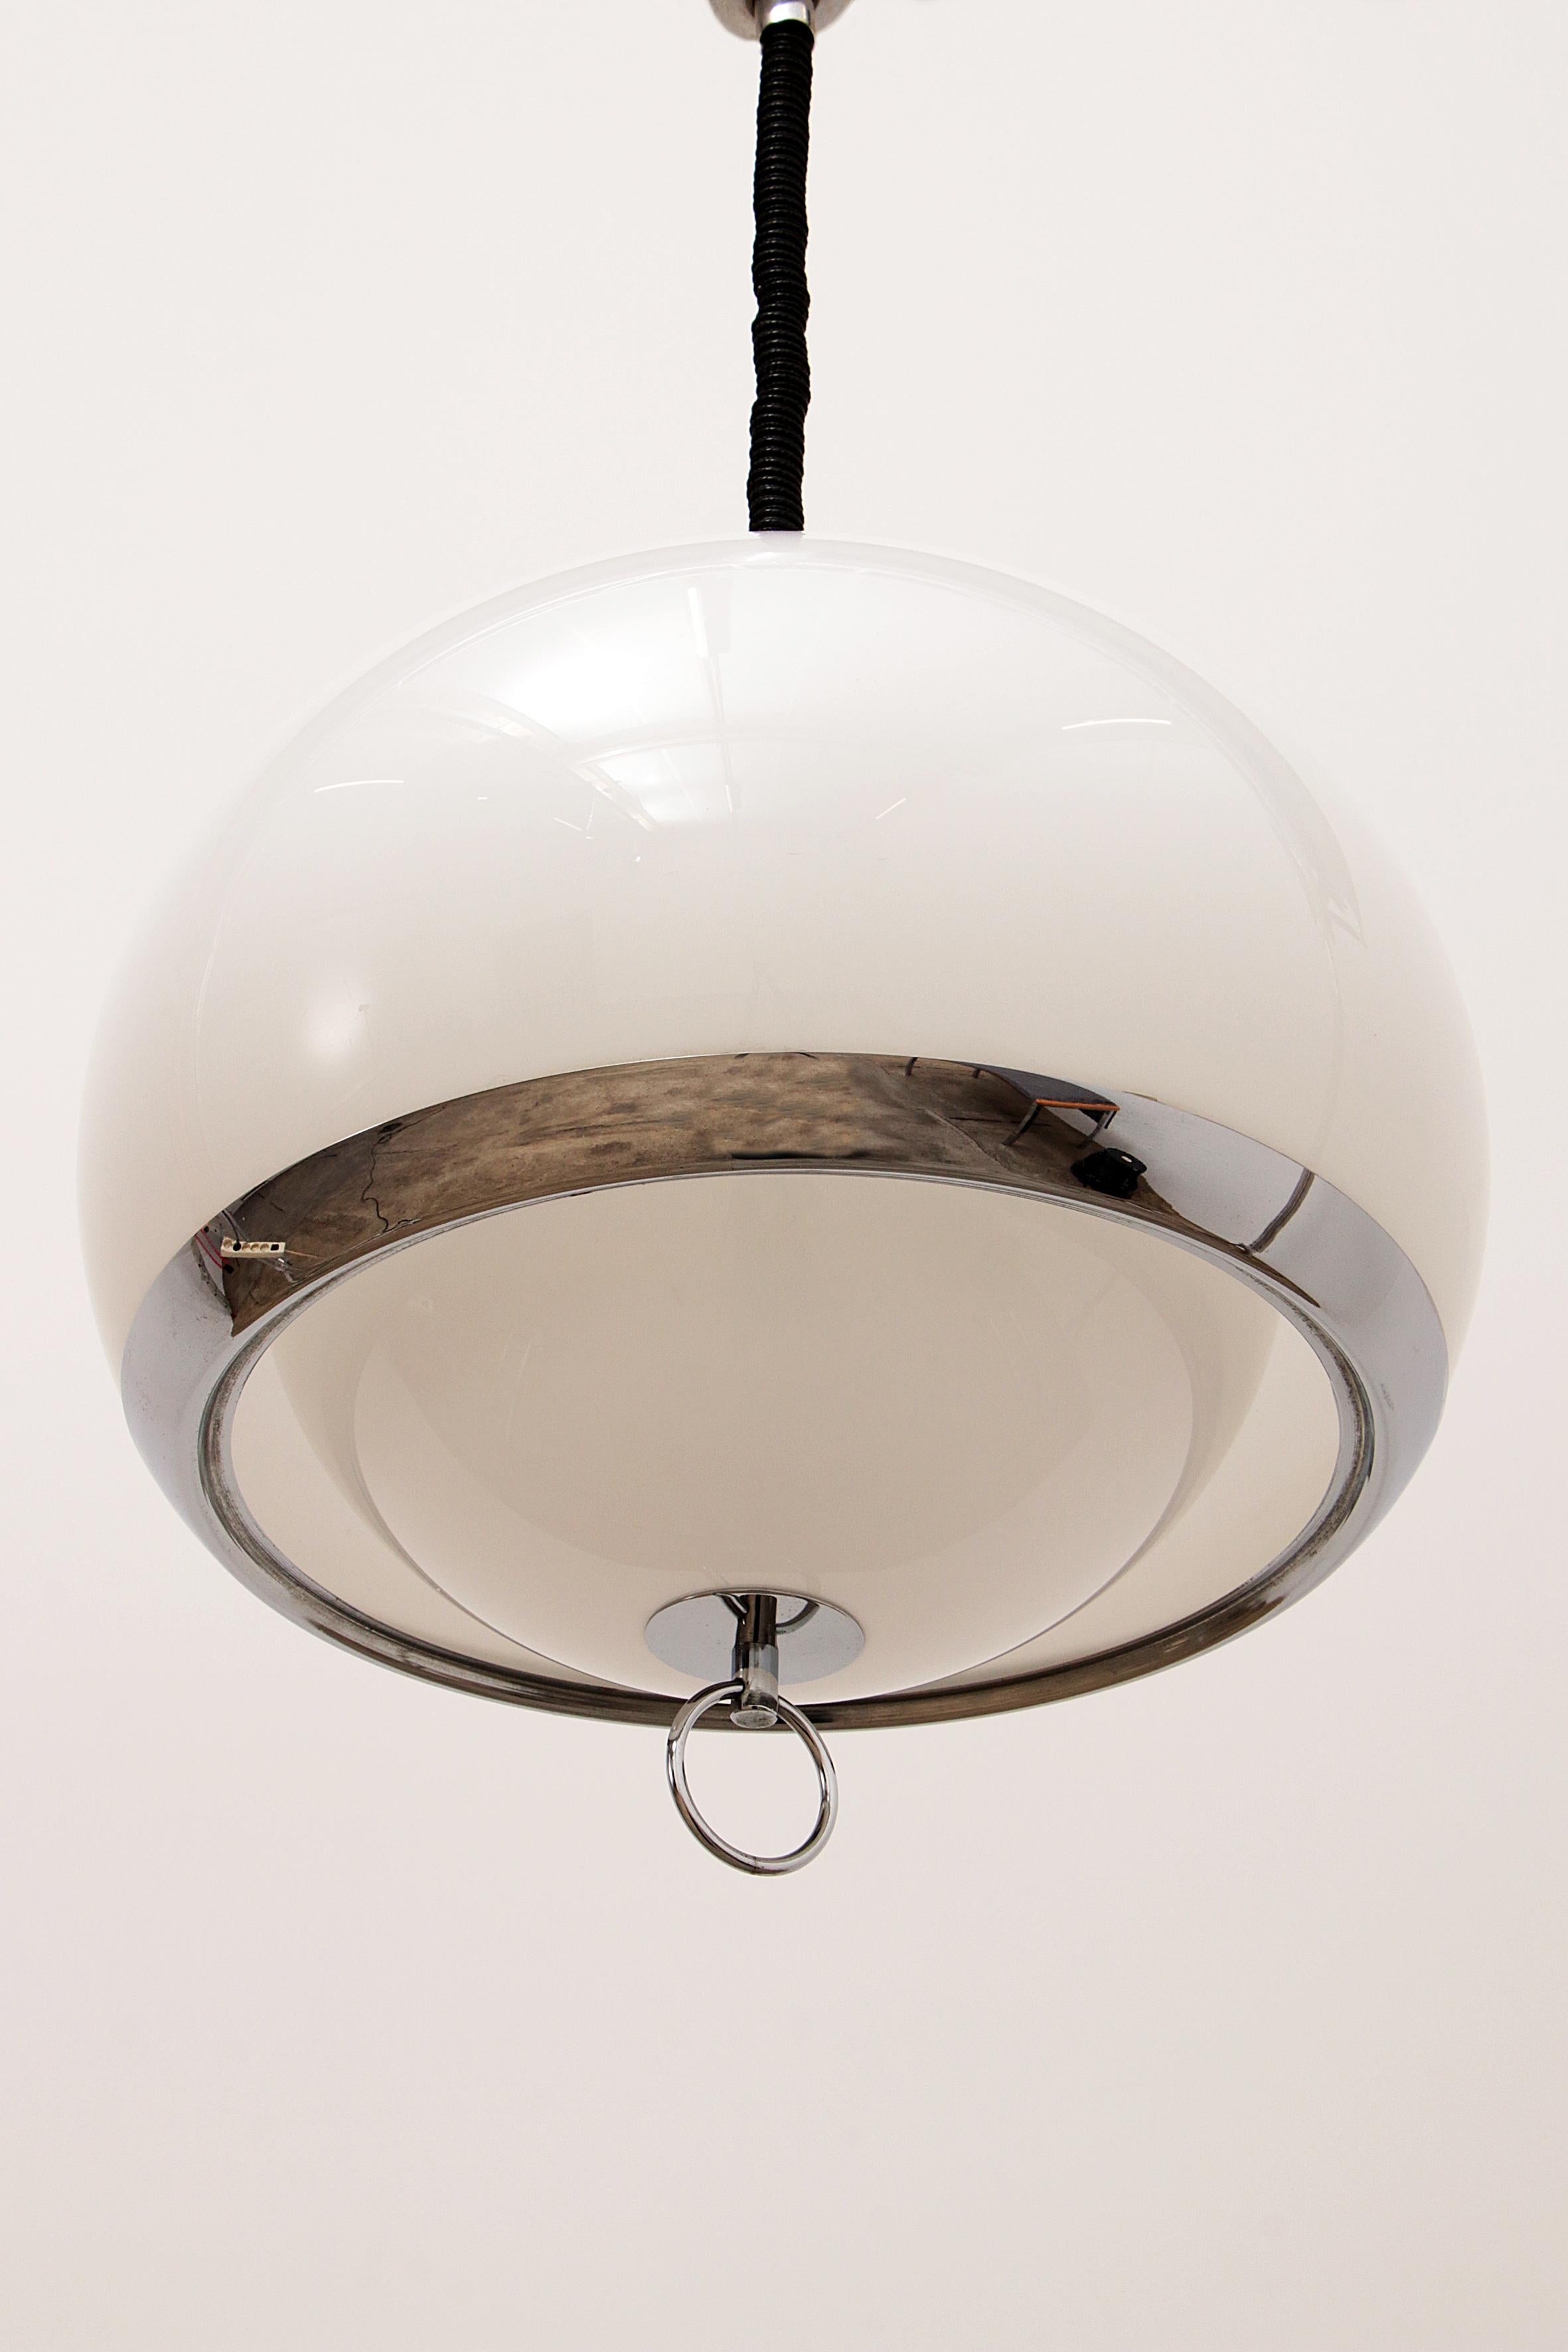 Opaline Space Age German Pendant Lamp with Harmonica Cord For Sale 4